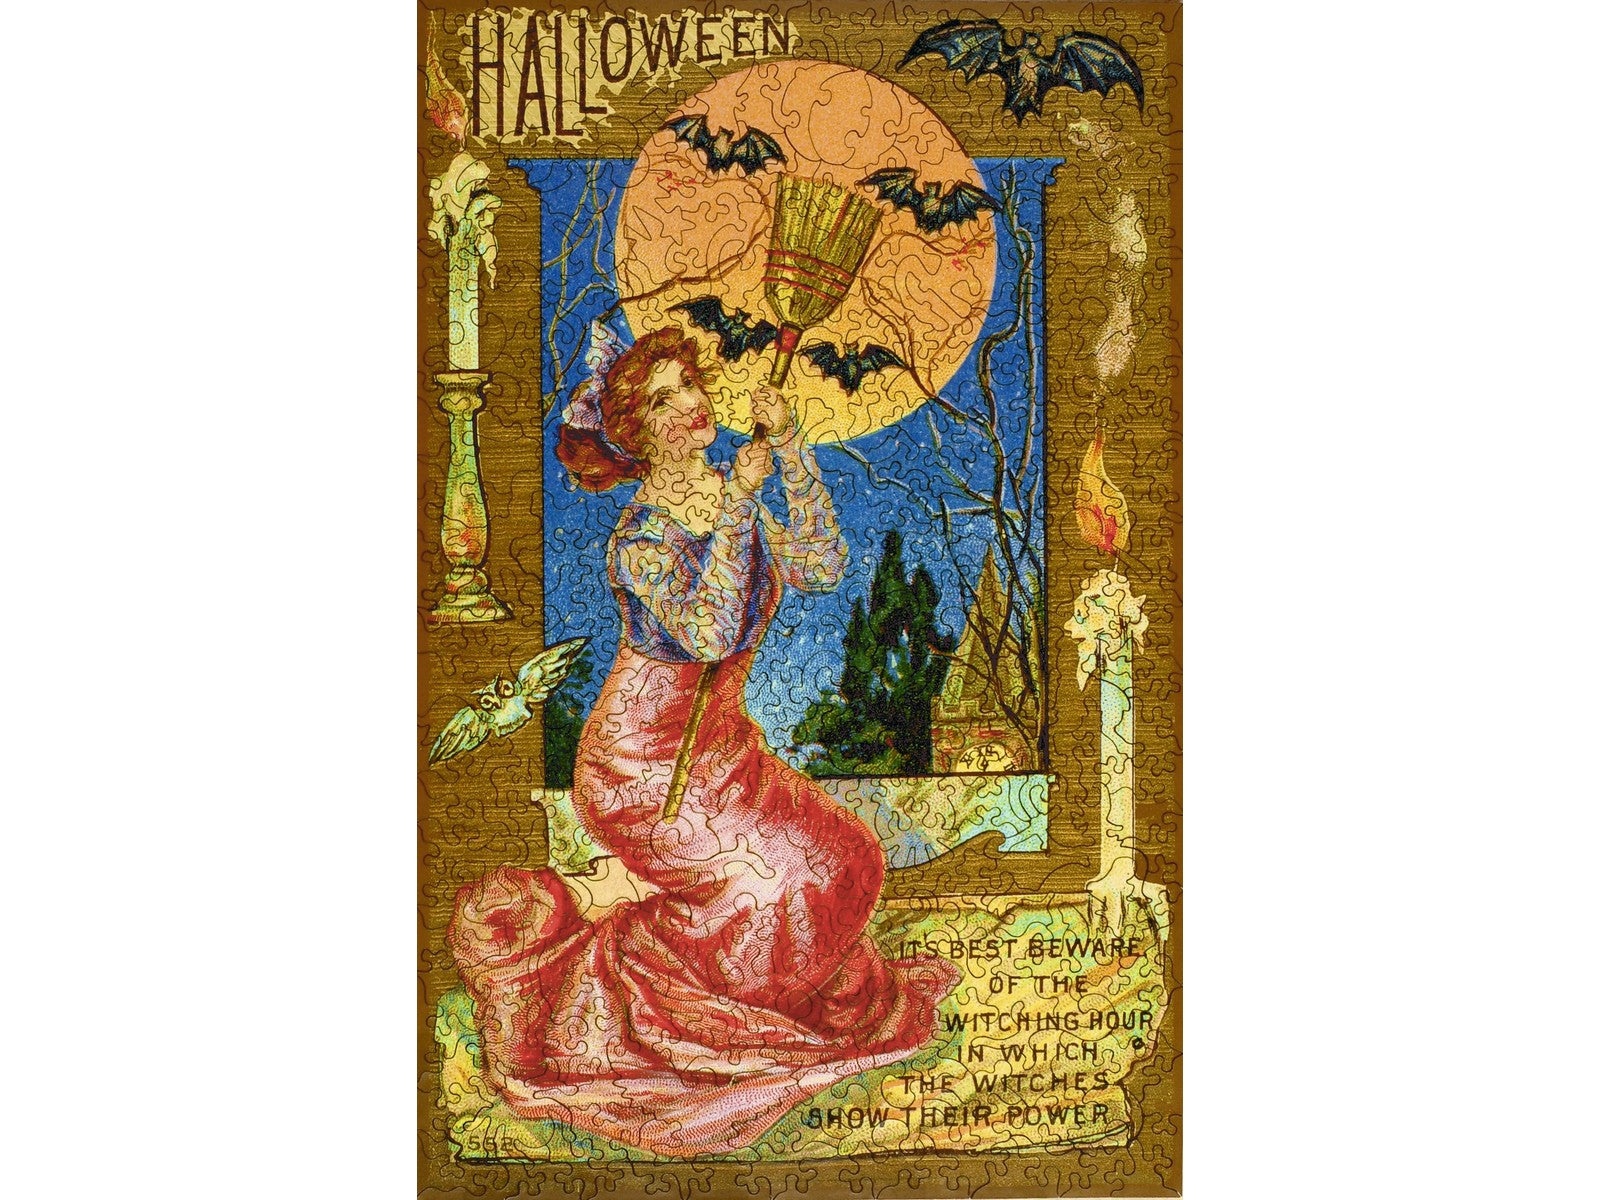 The front of the puzzle, The Witching Hour, which shows a woman holding a broom, surrounded by candles and bats.